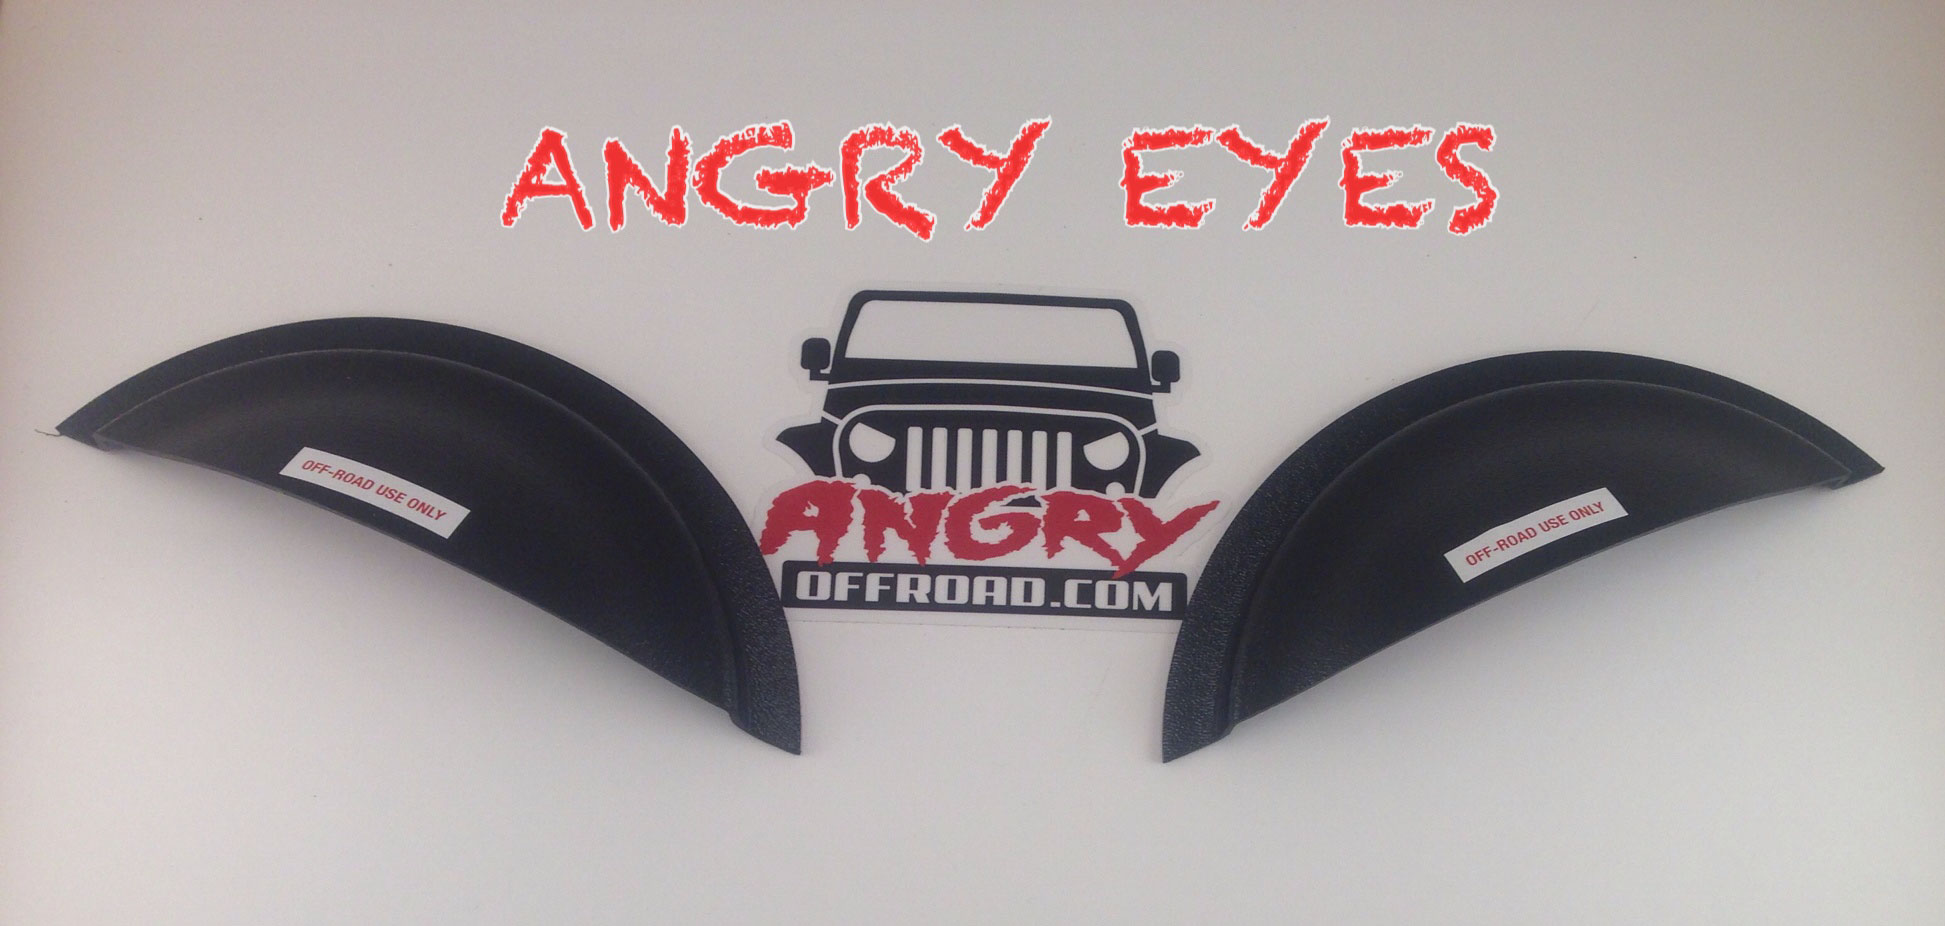 Angry Eyes Jeep Headlight Covers, Angry Eyes, Half Moon Headlight Covers, Jeep Headlight Covers, Jeep Angry Eyes Headlight Covers, ANGRY EYES ARE FOR OFF ROAD USE ONLY